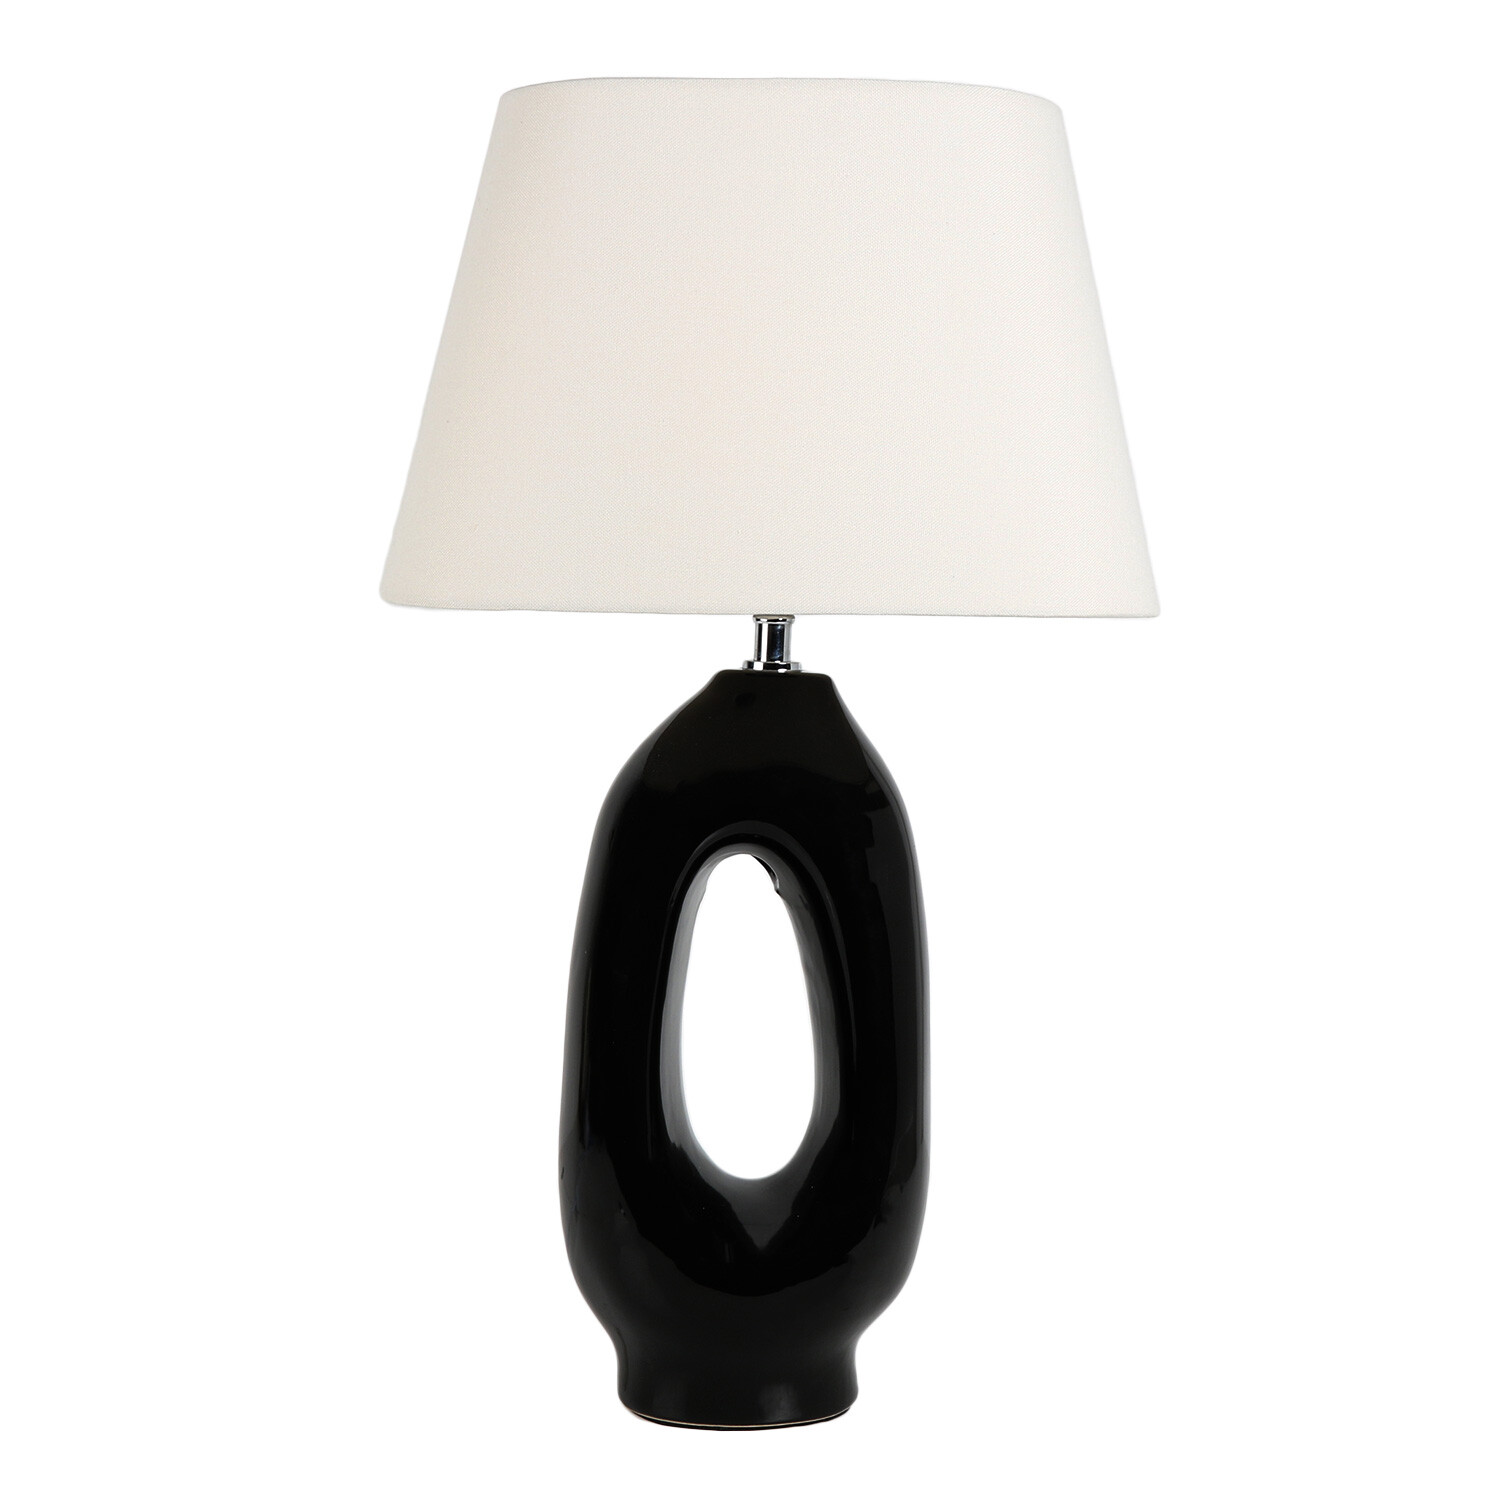 Single Harriet Oval Table Lamp in Assorted styles Image 5